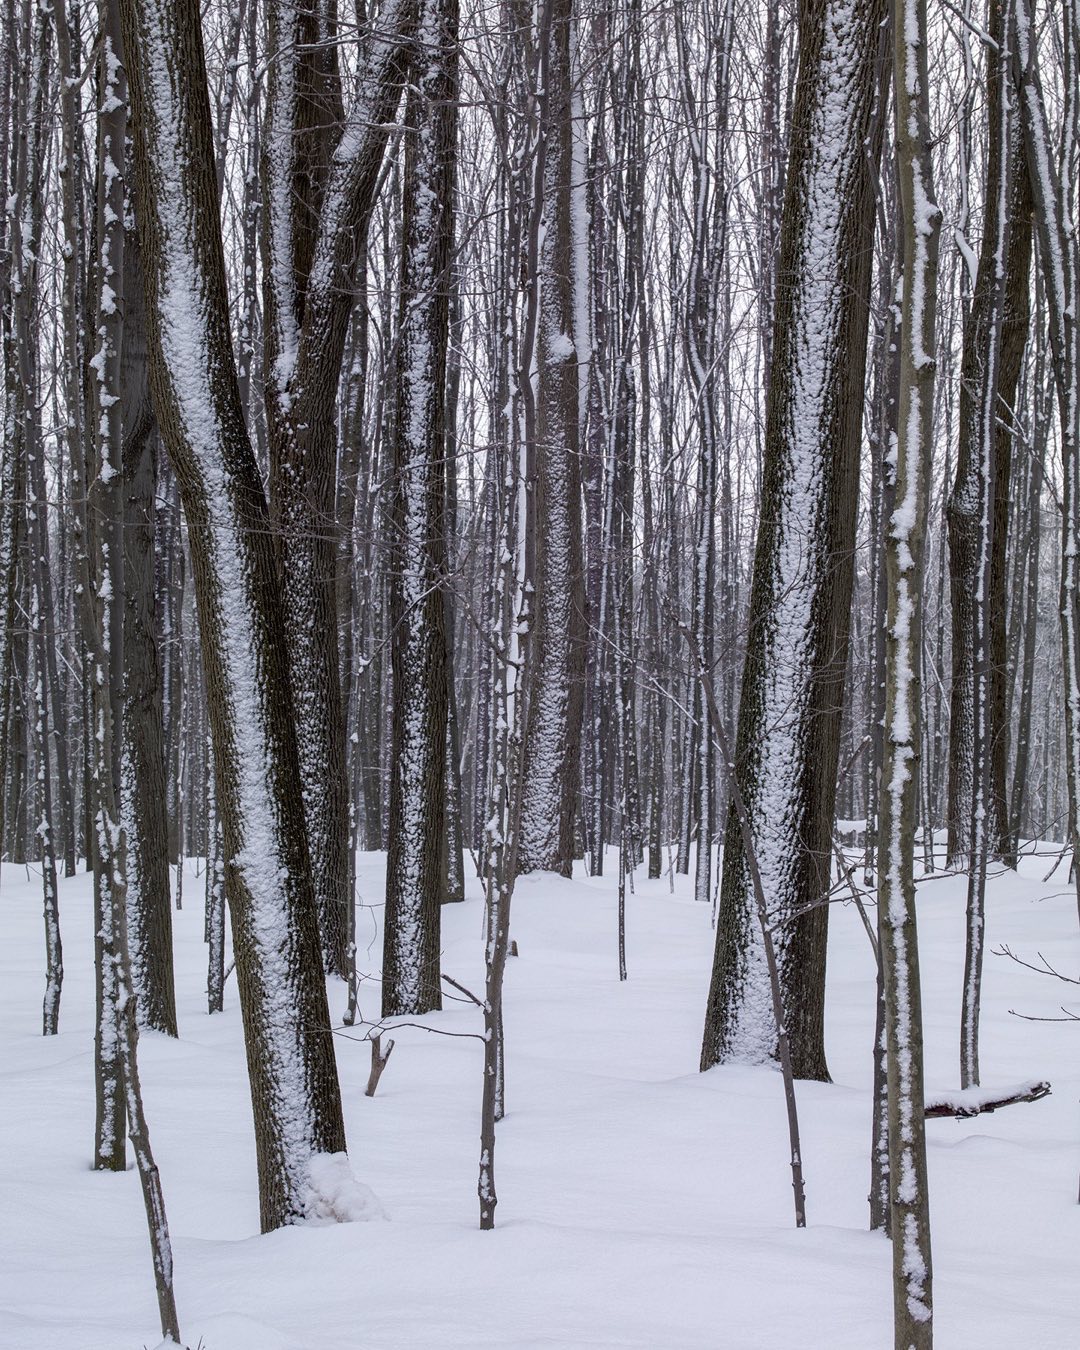 Tree trunks after an overnight snow storm are provided with additional definition with snow on the side facing the wind driven snow. The ethereal nature of this scene evoked a sense of solitude and completeness in the winter forest in western New York State a few years ago. #westernnewyorkstate #solitude #winterphotography #orcuttphotography.com